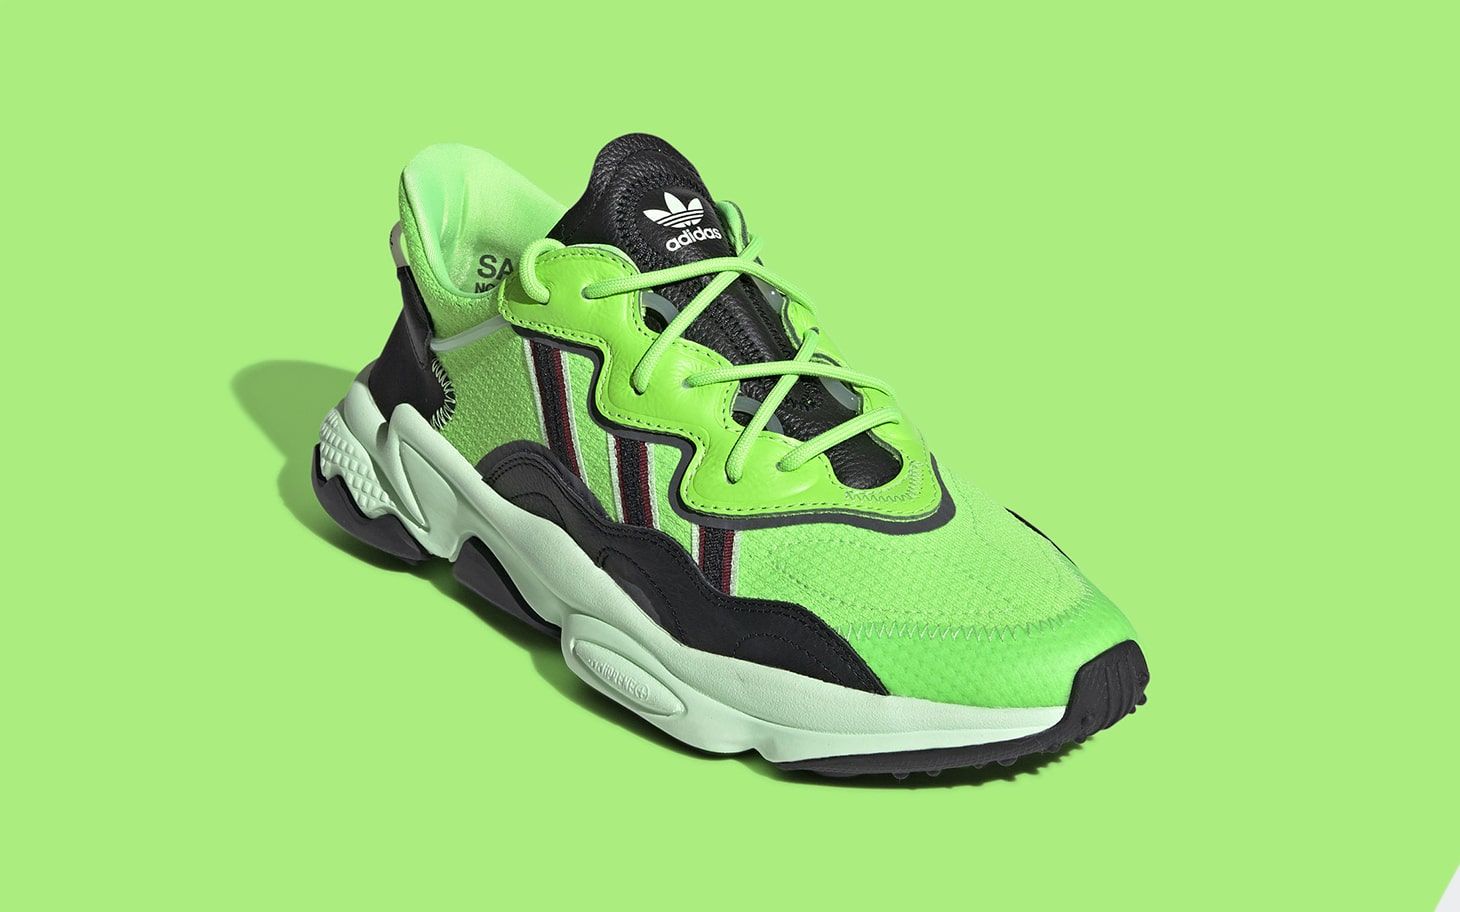 The adidas Ozweego Surfaces in Shocking Neon Green | House of Heat°